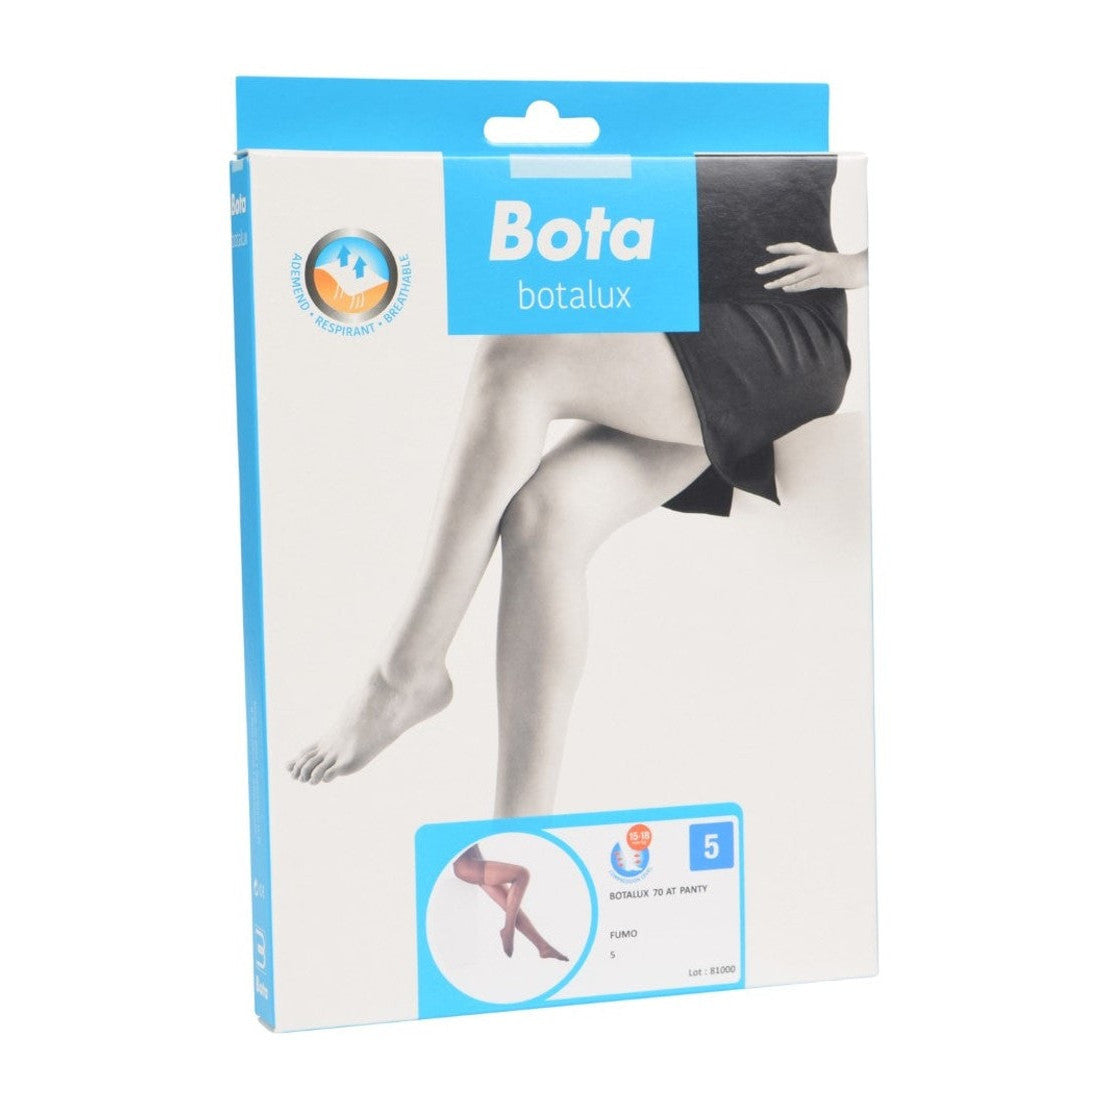 Botalux 70 support tights at fumo